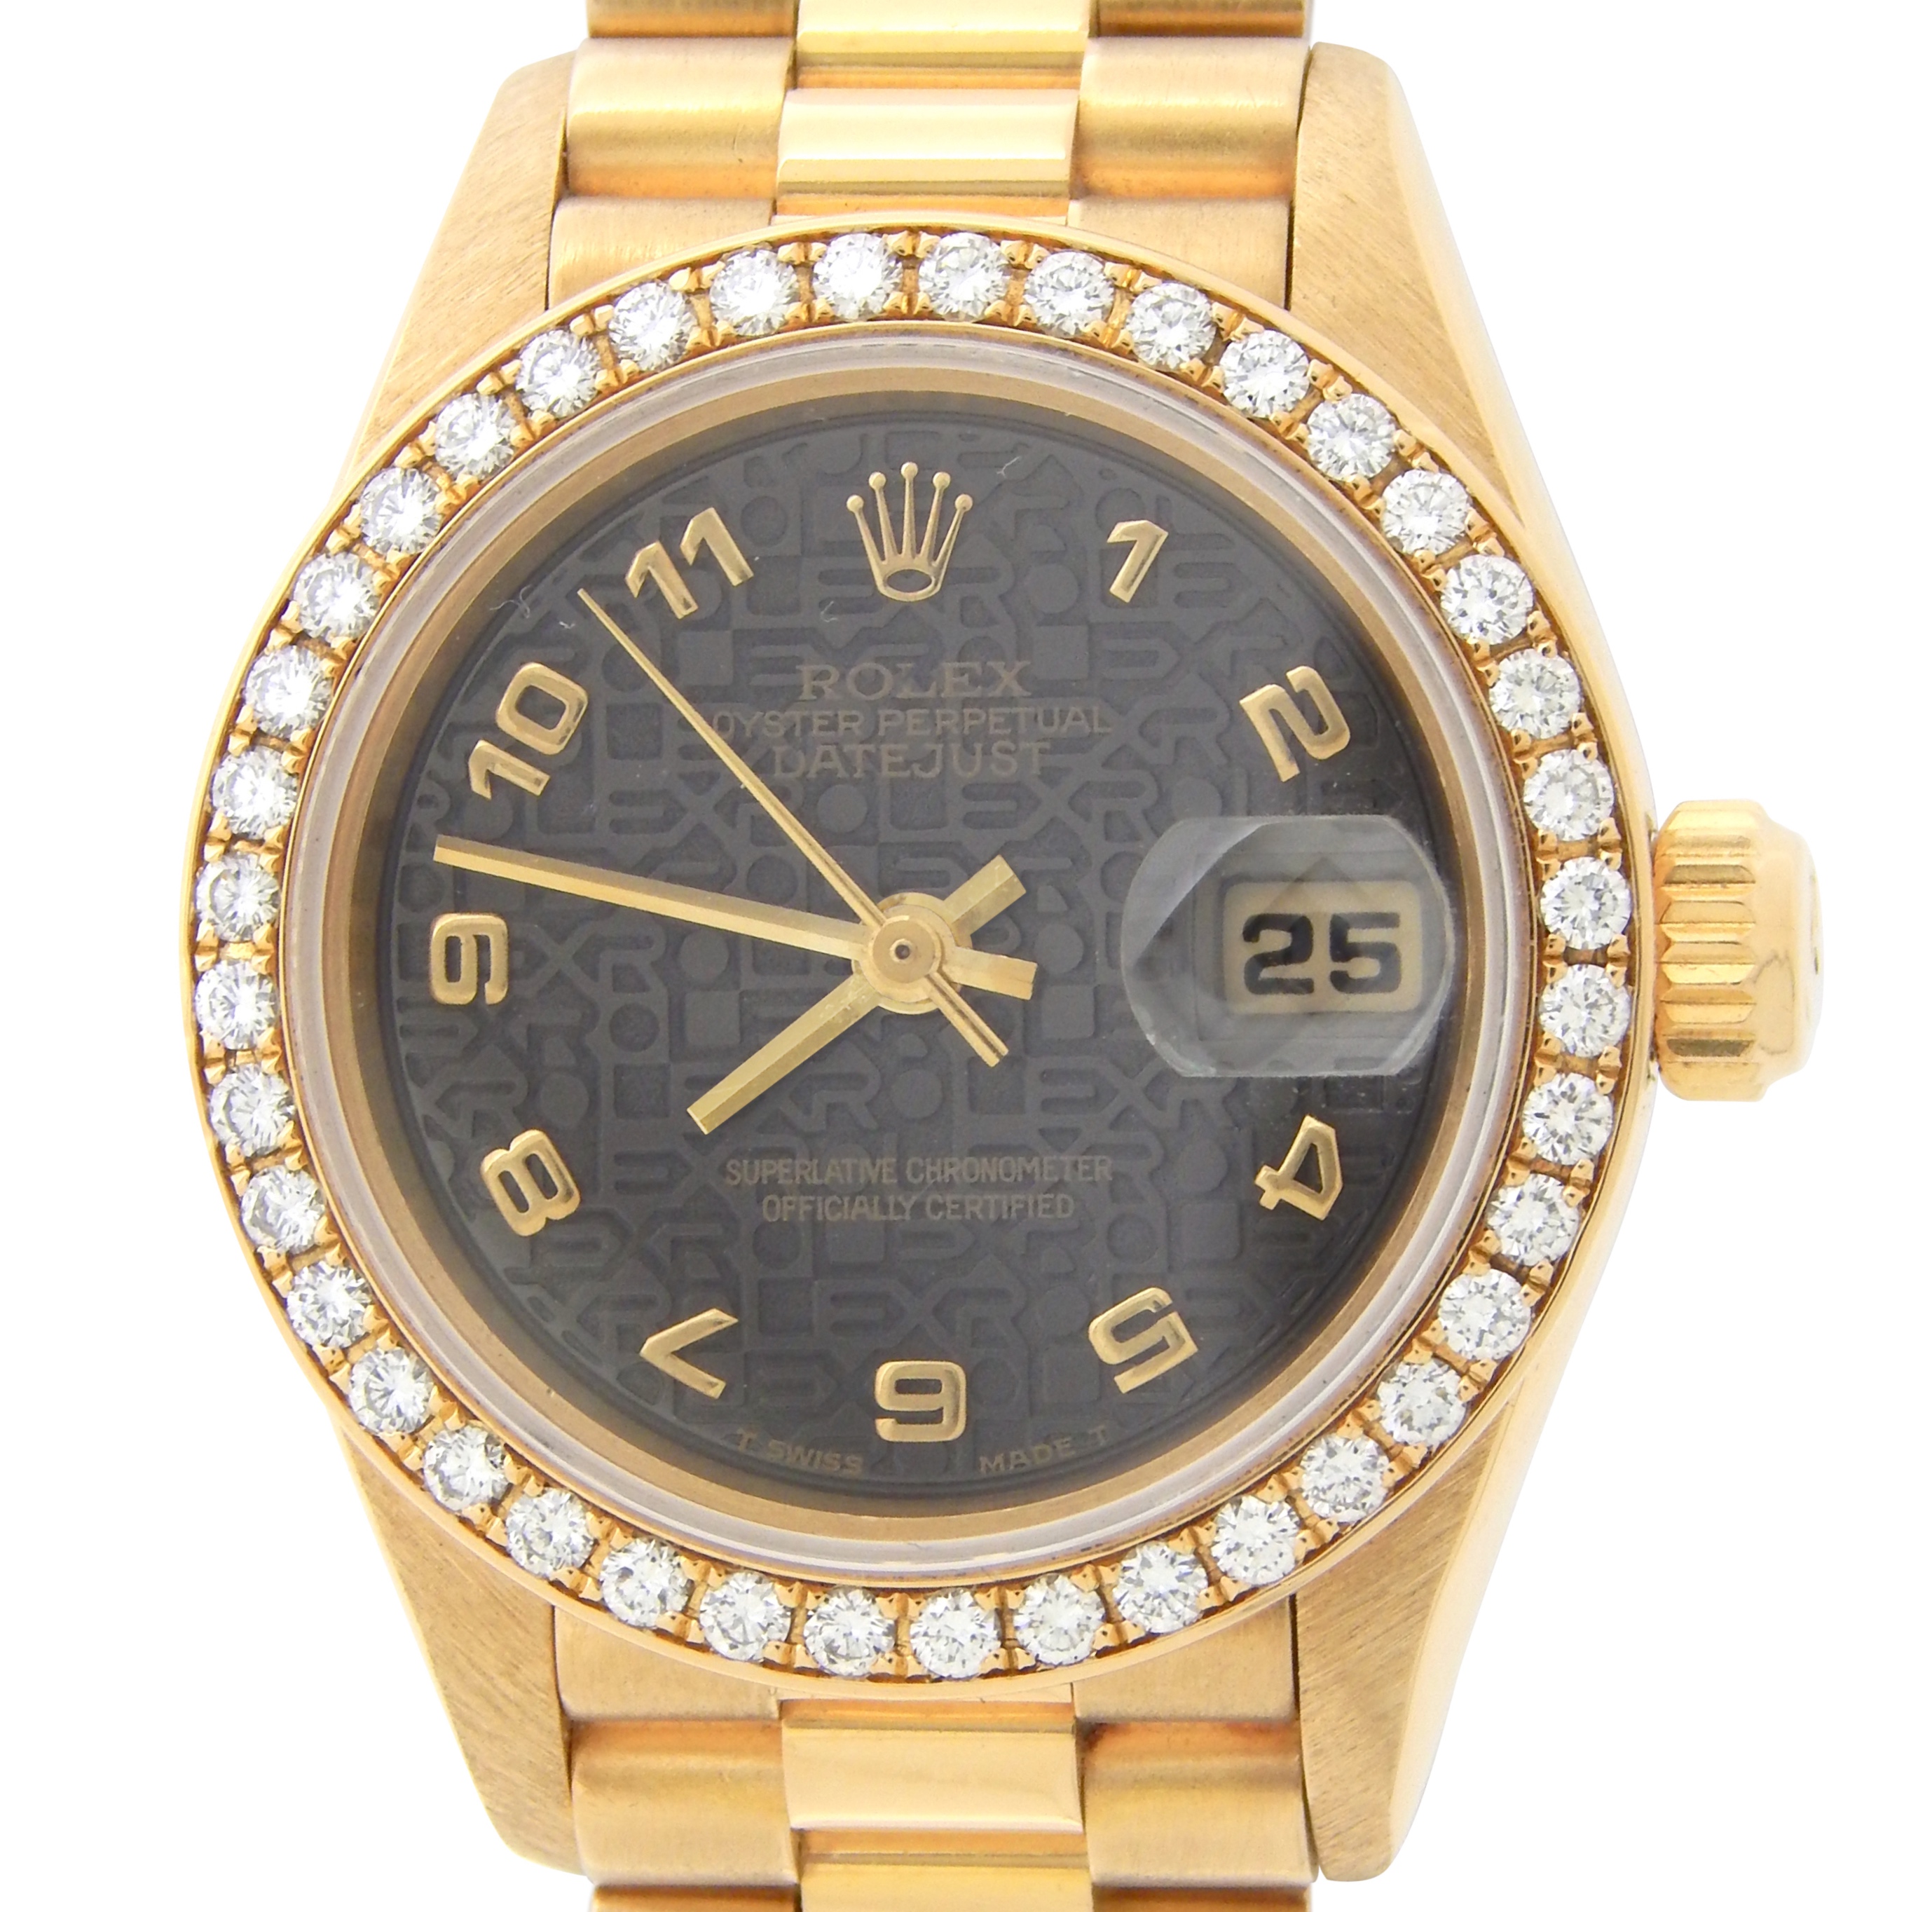 ROLEX OYSTER PERPETUAL DATEJUST PRESIDENTIAL Automatic 26mm 18K Yellow Gold  Diamond Watch